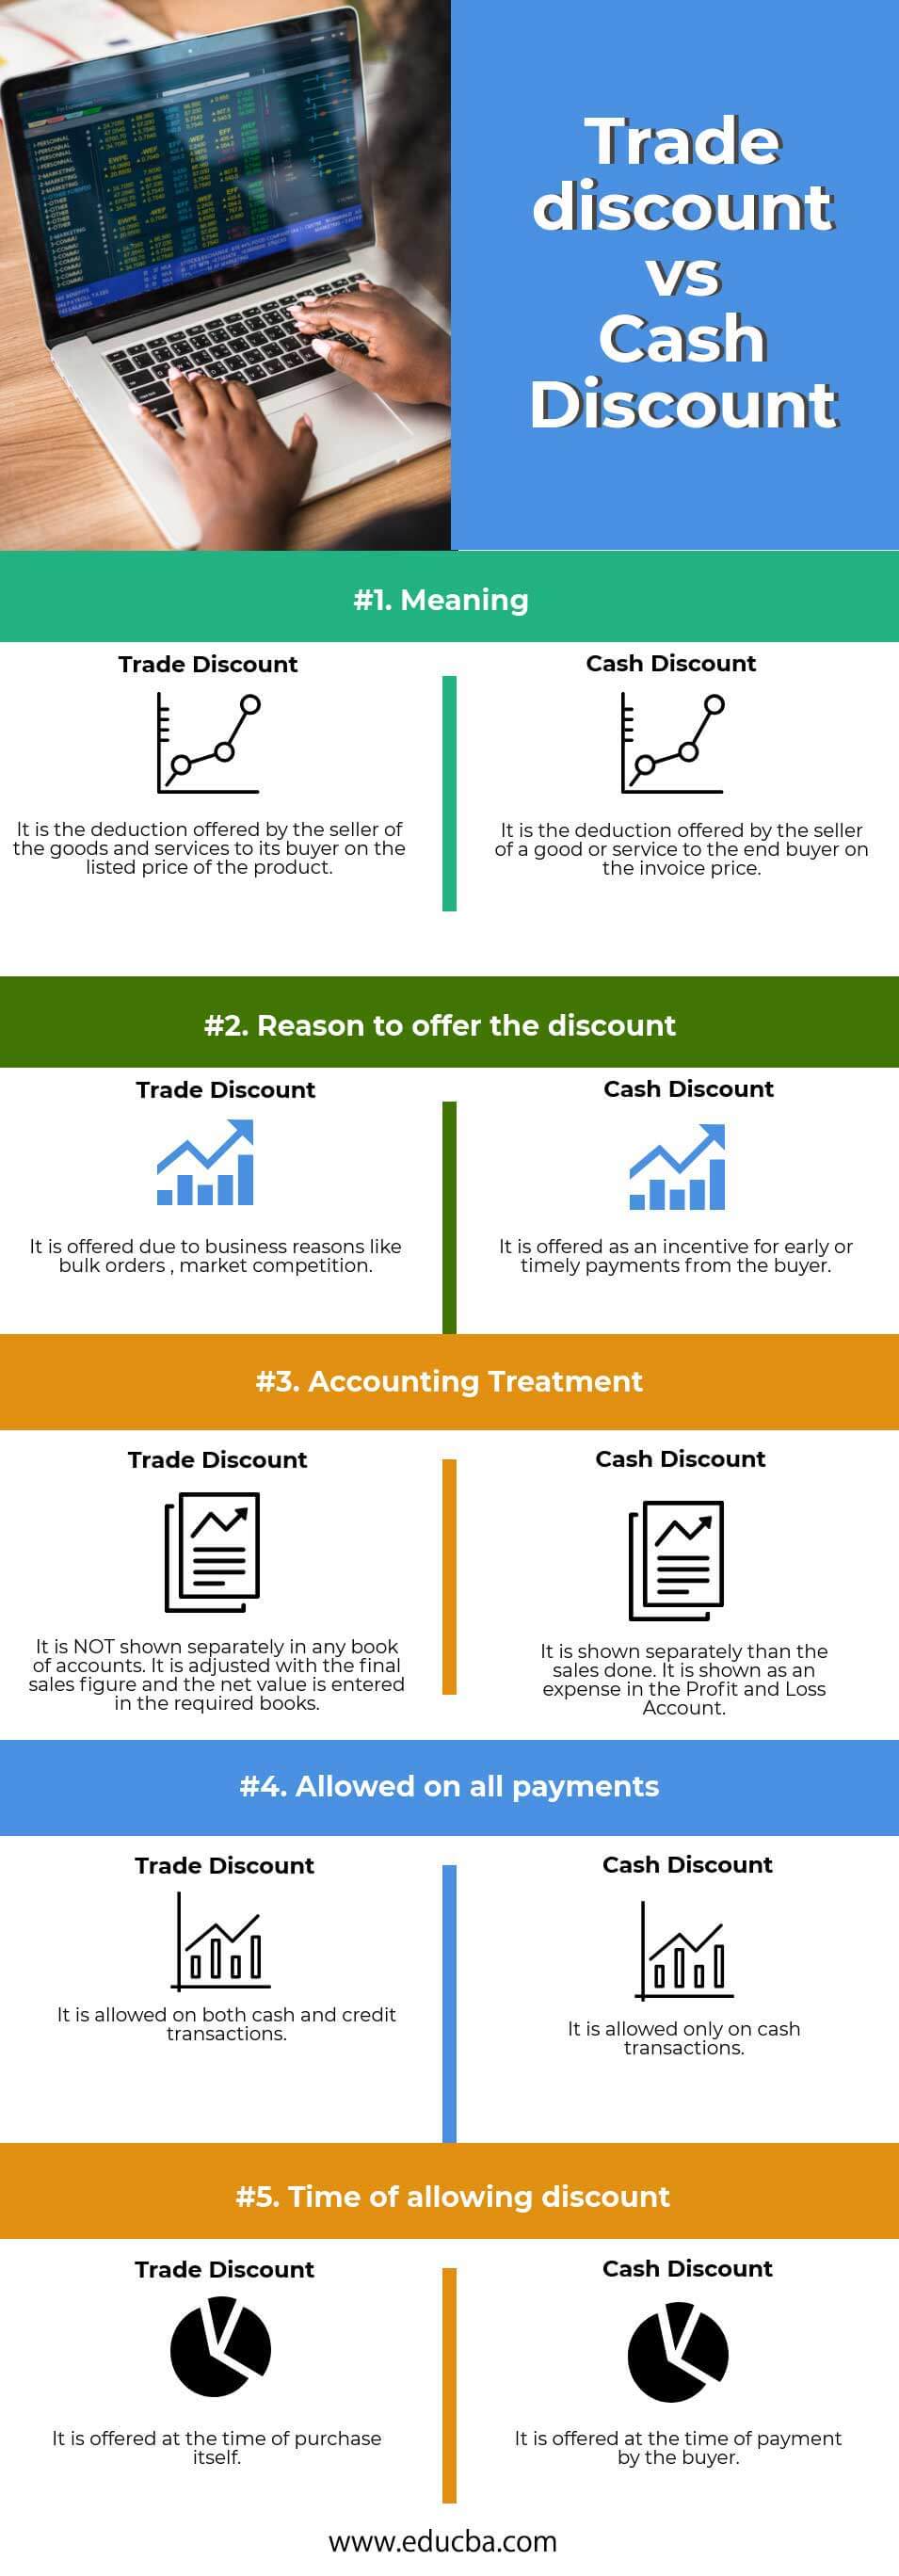 Trade Discount Vs Cash Discount Top 5 Differences You Should Know